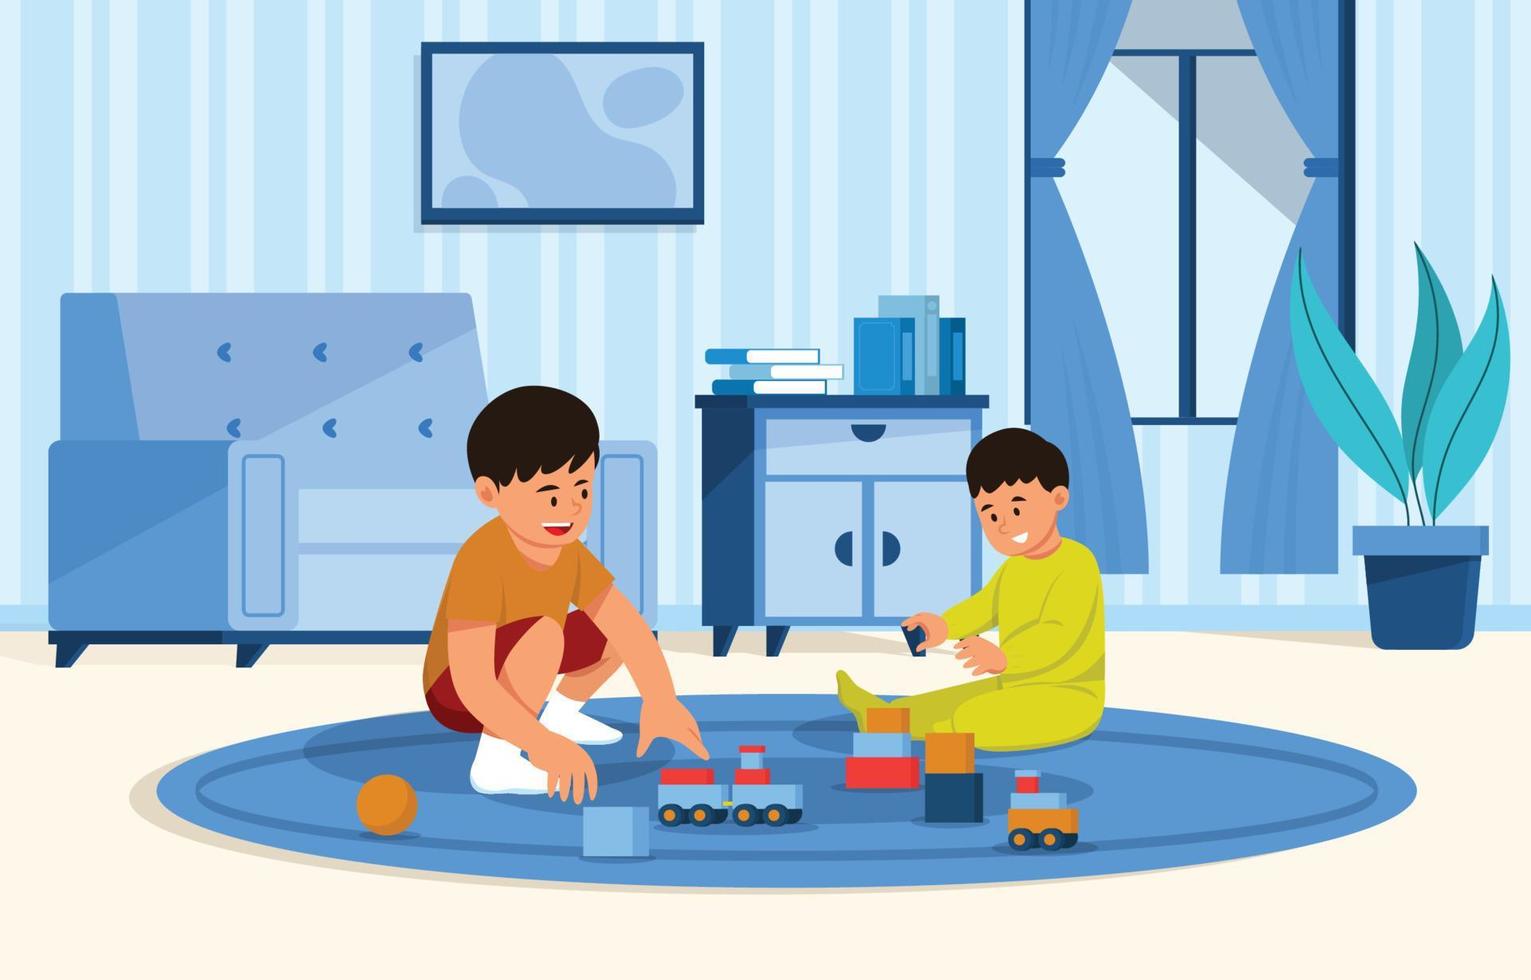 Kids Playing Together In The Living Room vector